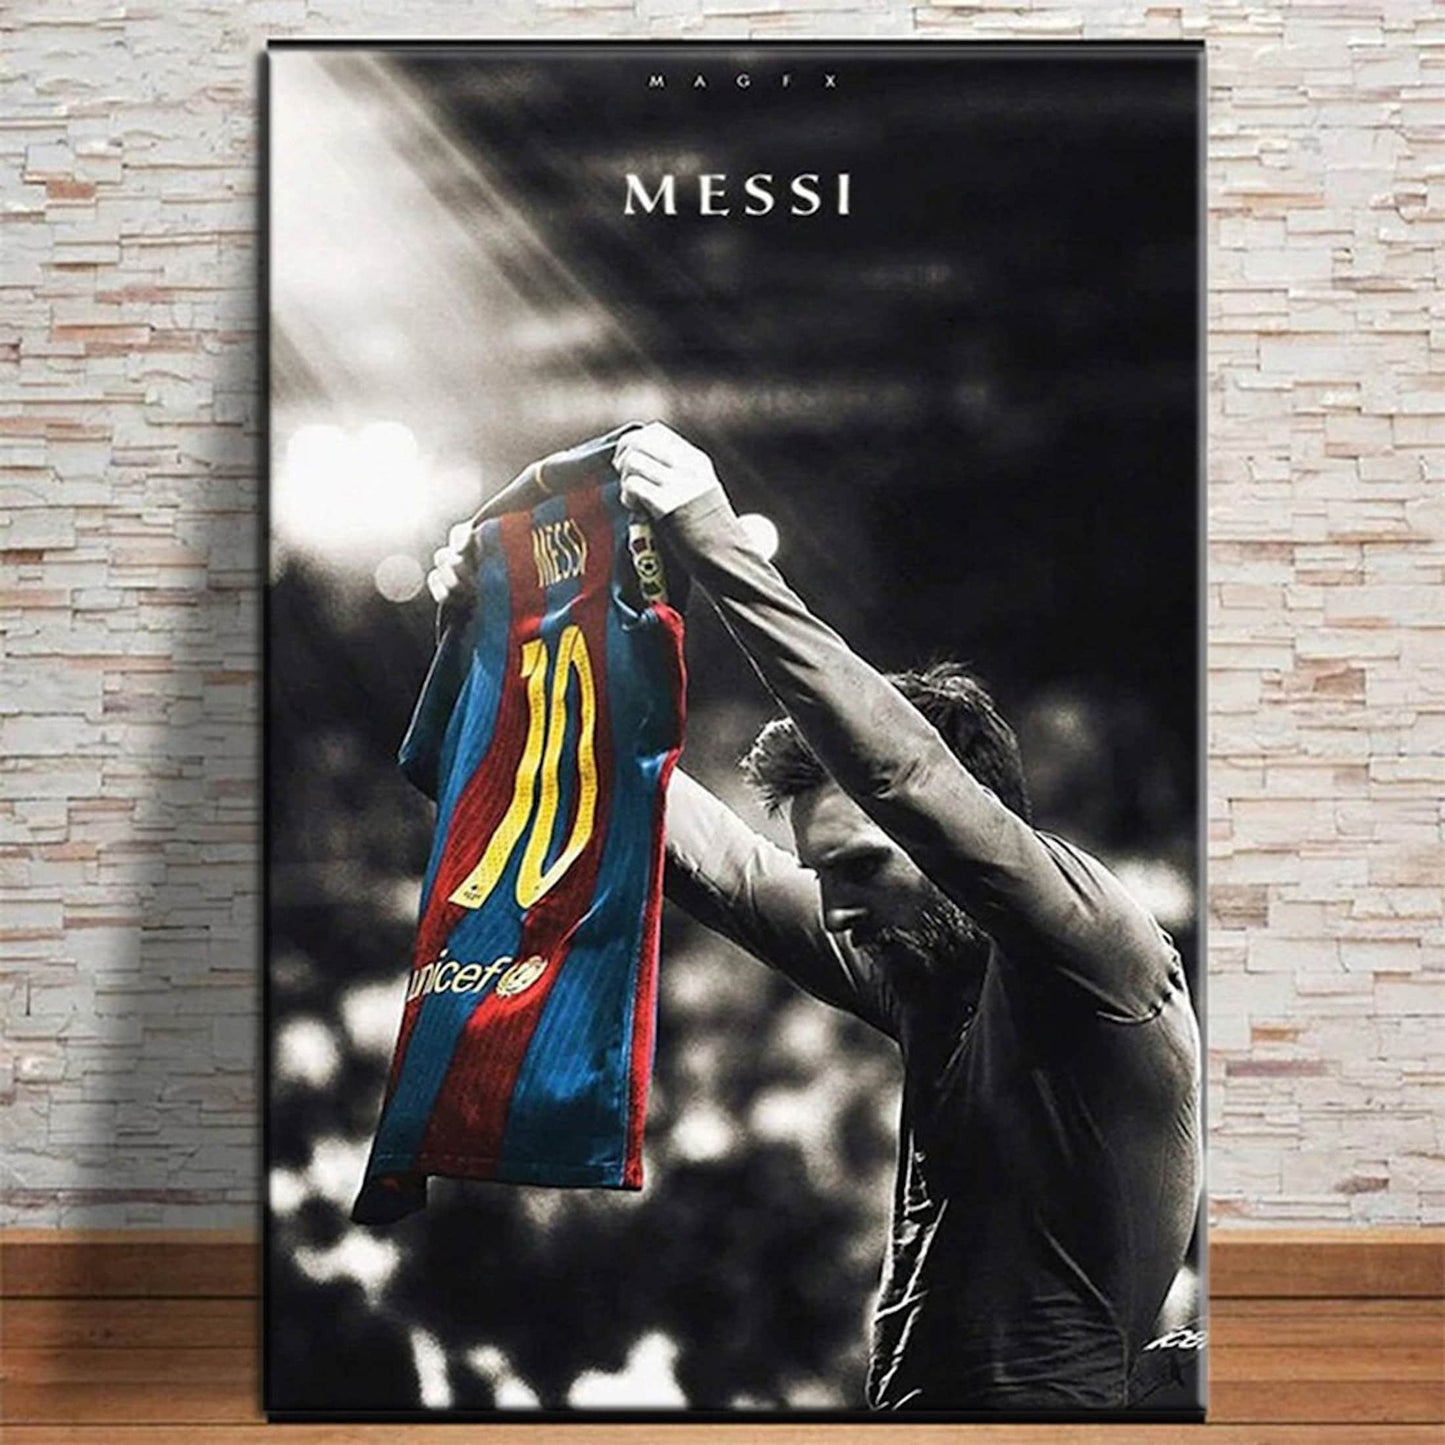 Poster football Lionel Messi number 10 at FC Barcelona as a decorative print without a frame